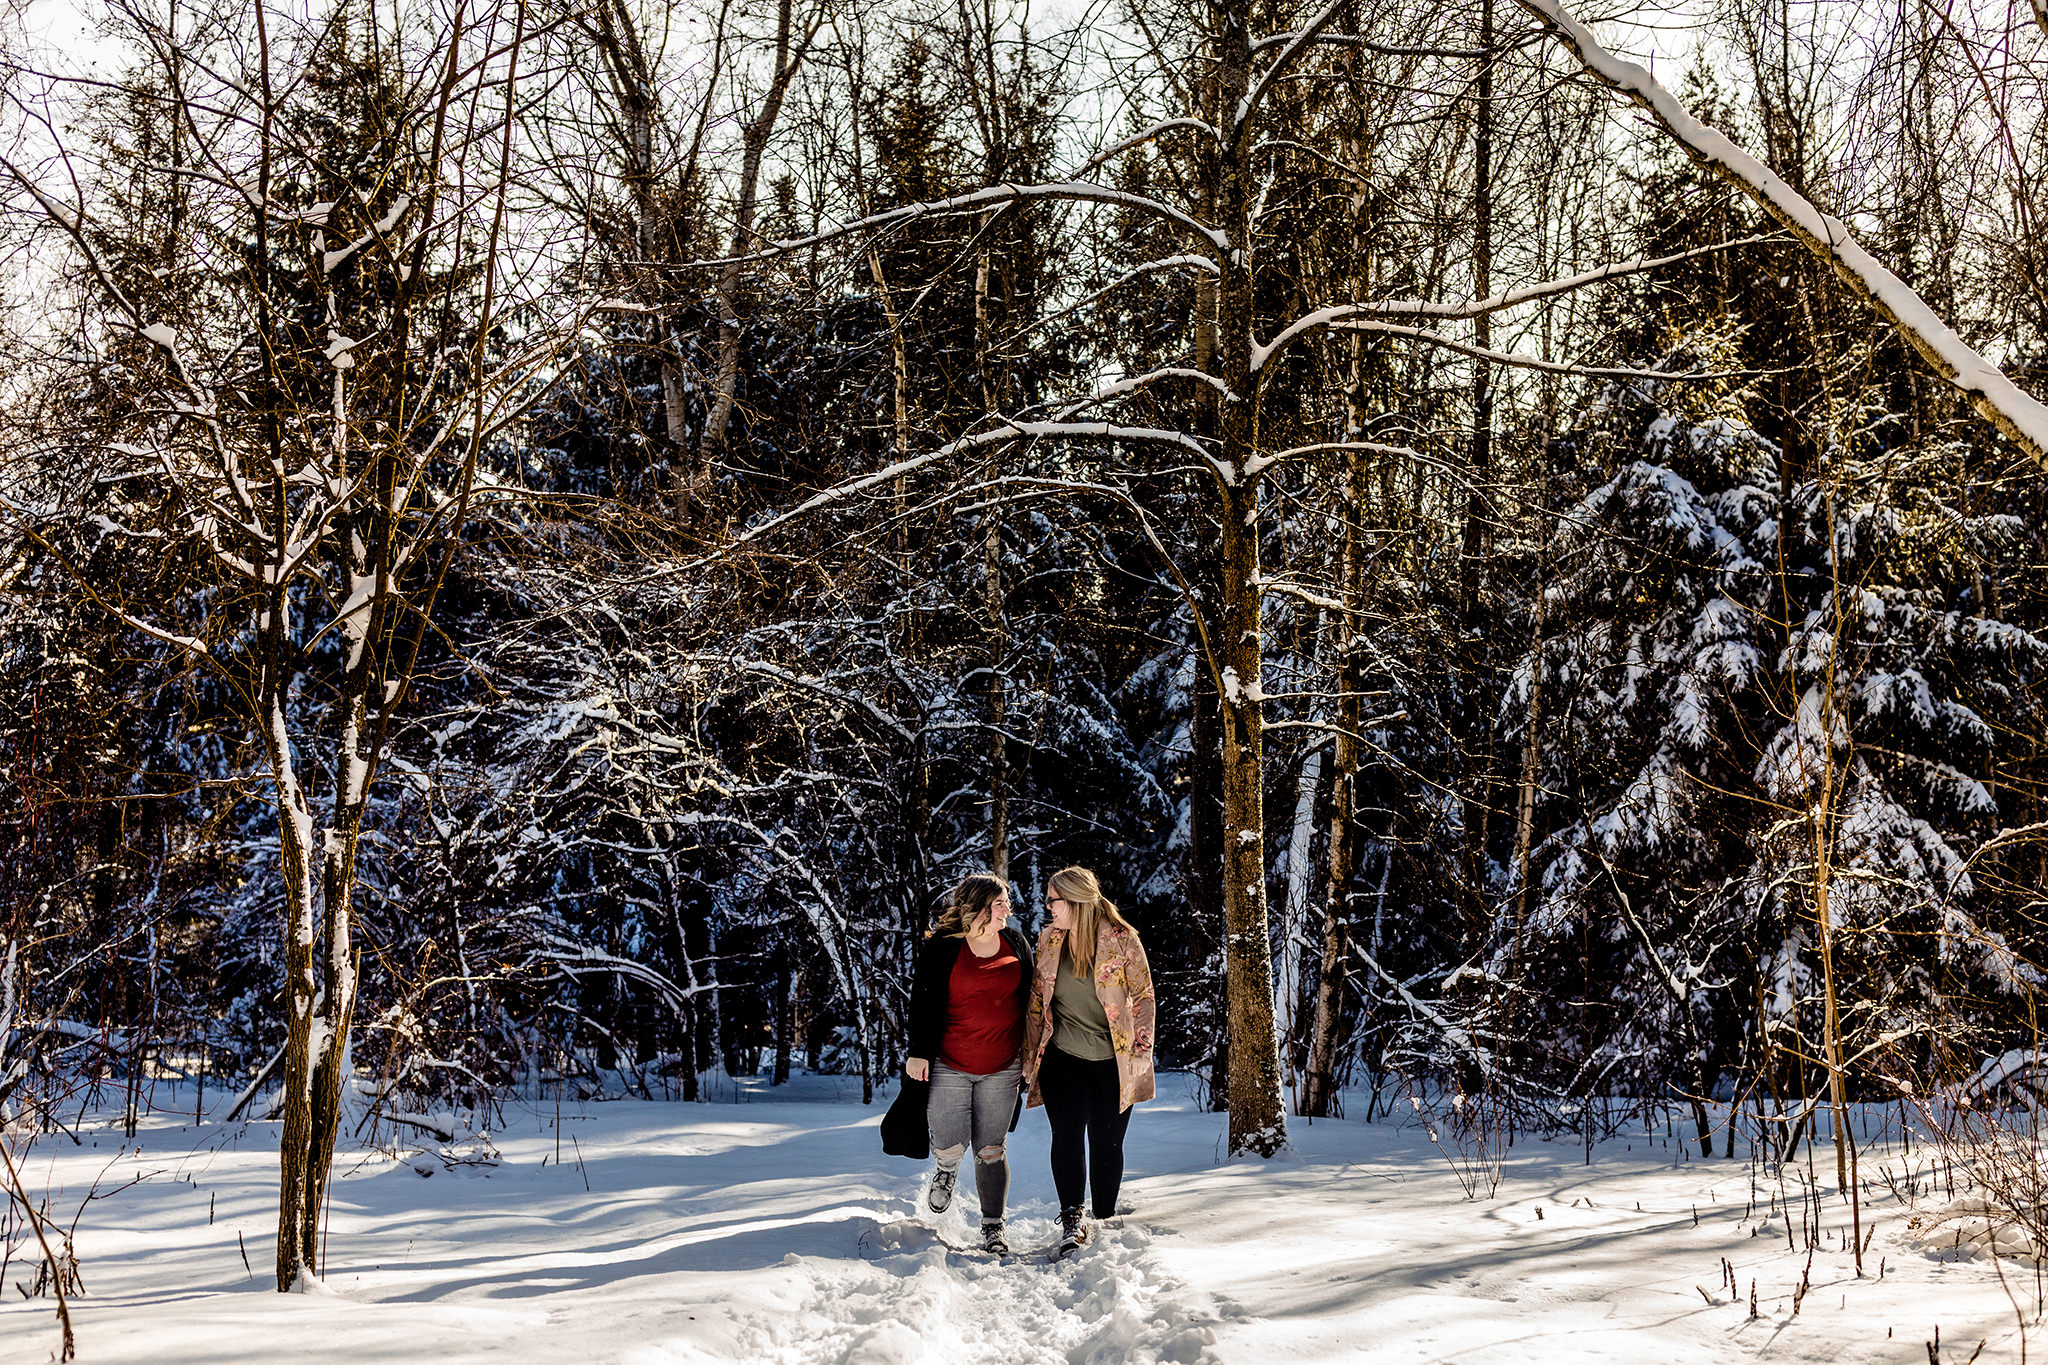 Engaged couple hold hands walking together down a snowy path in a winter forest.